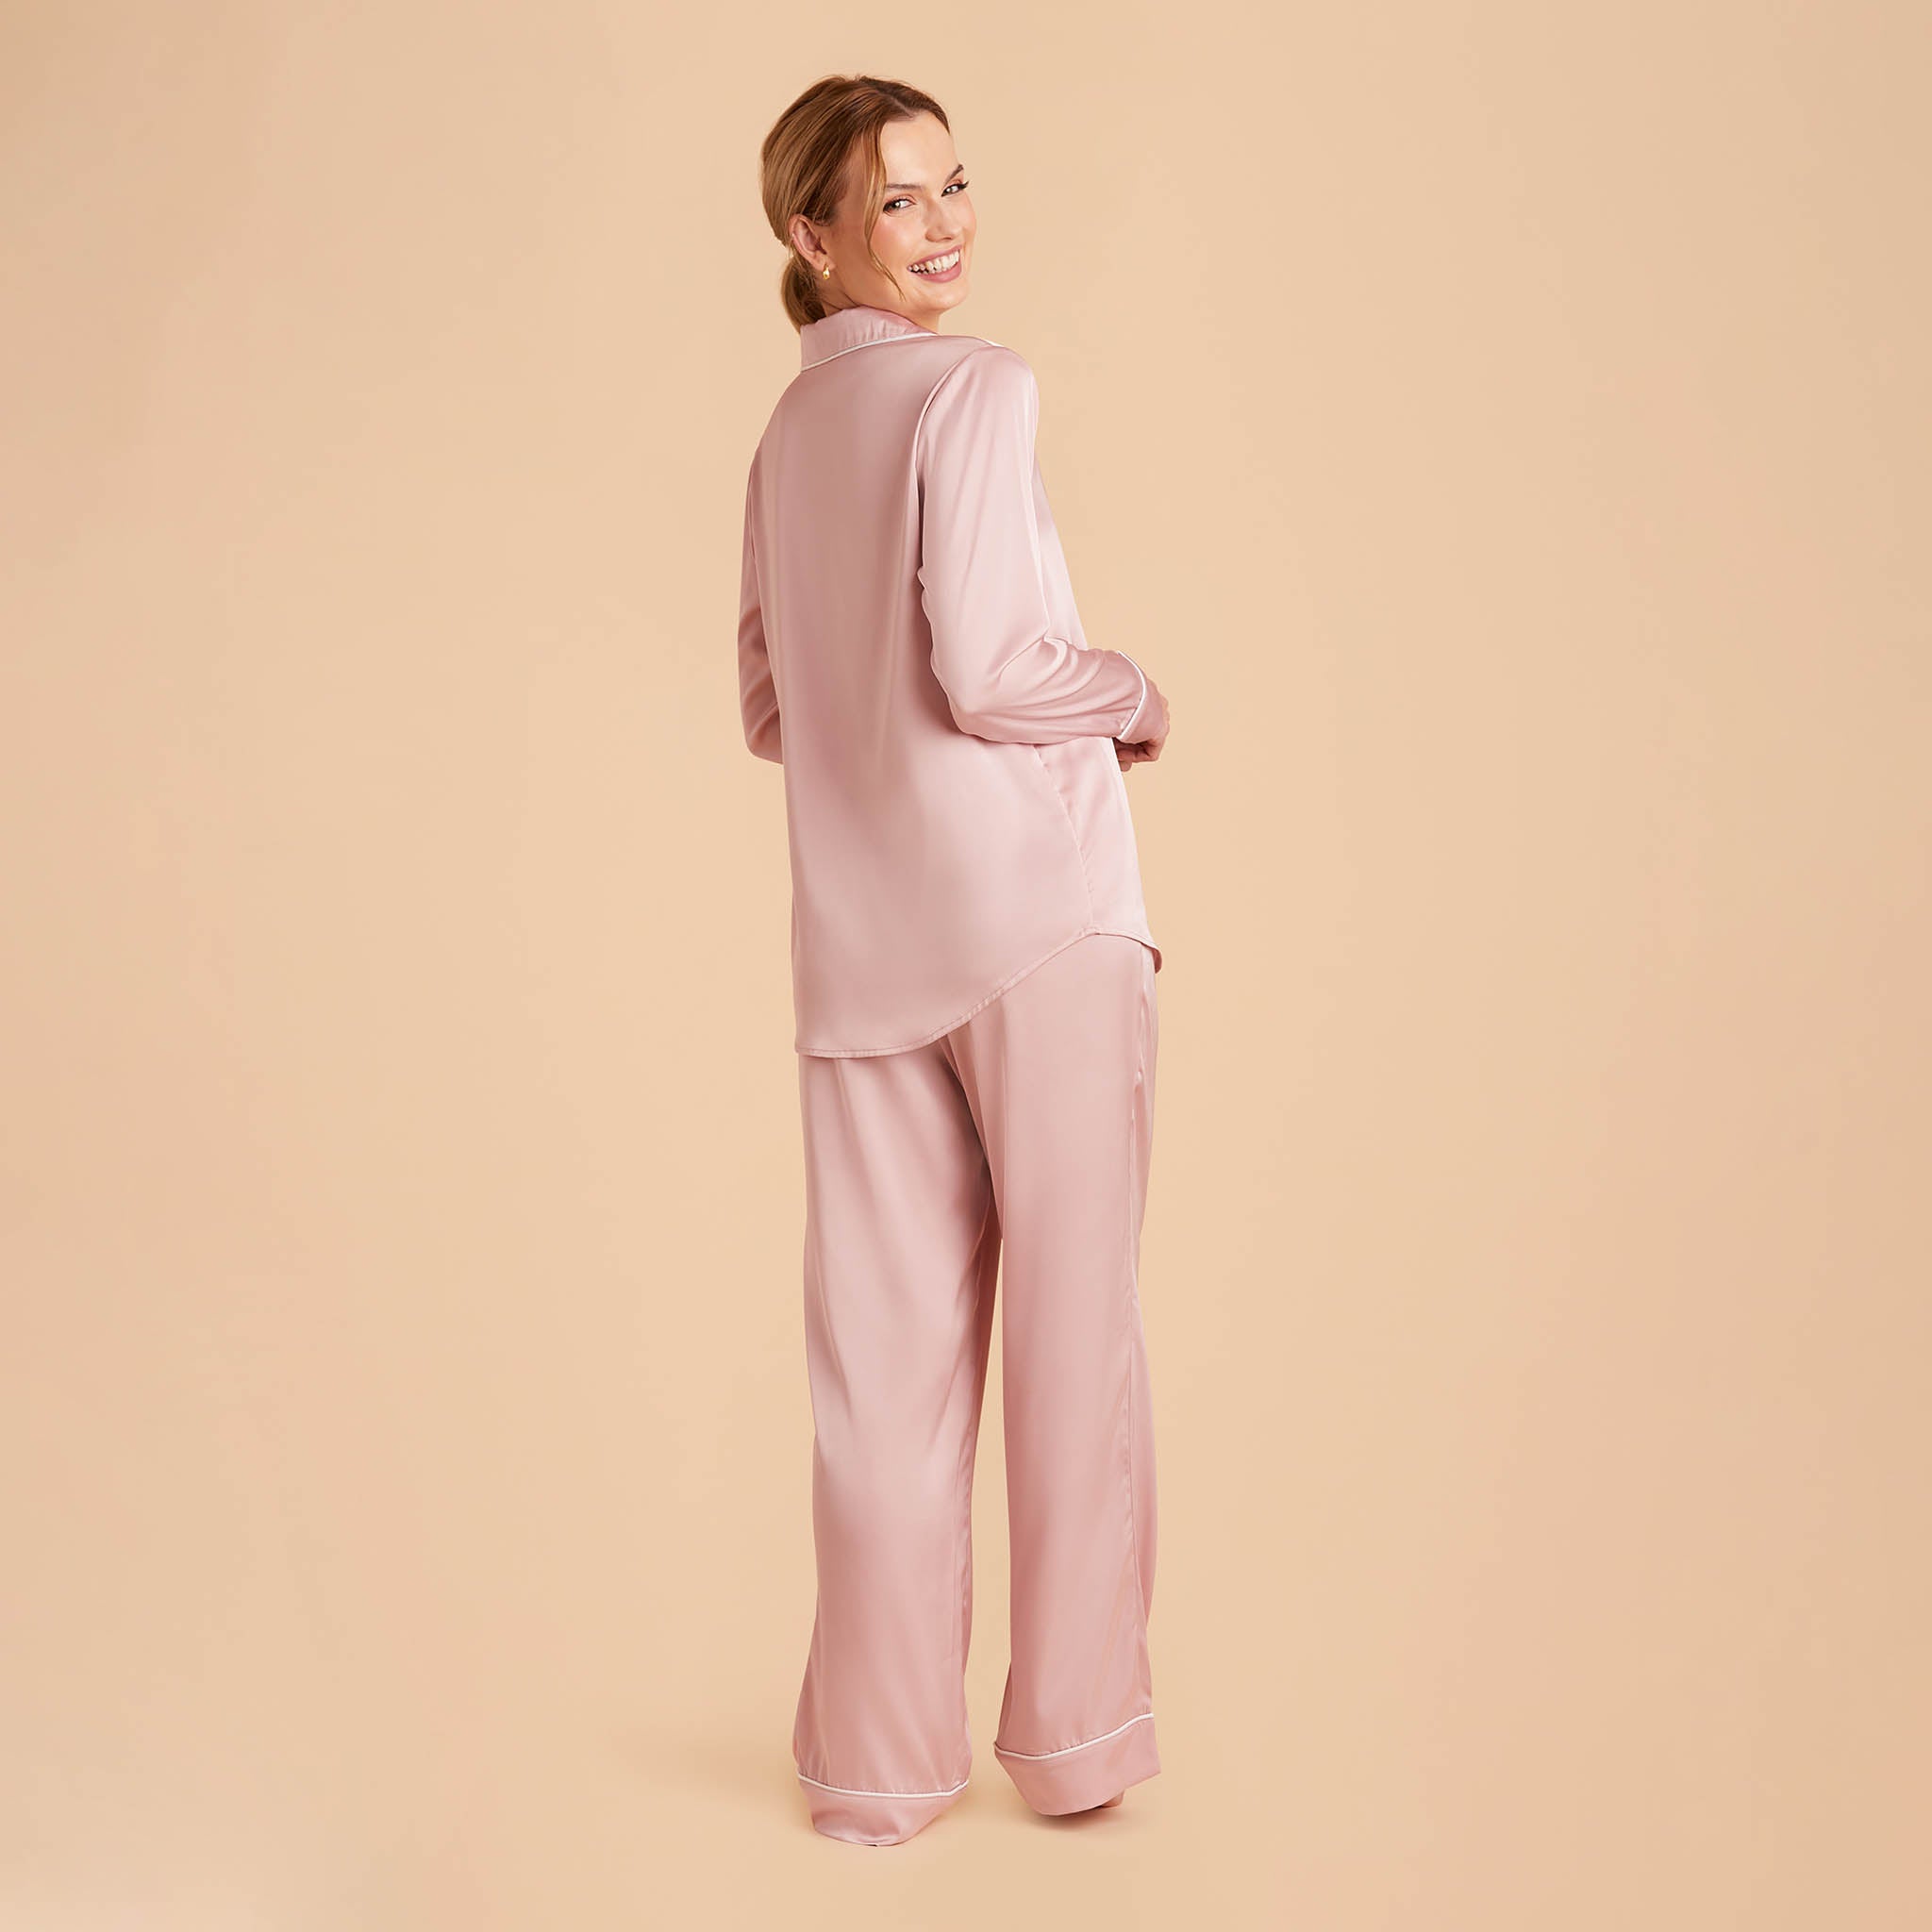 Jonny Satin Pants Bridesmaid Pajamas With White Piping in dusty pink, side view